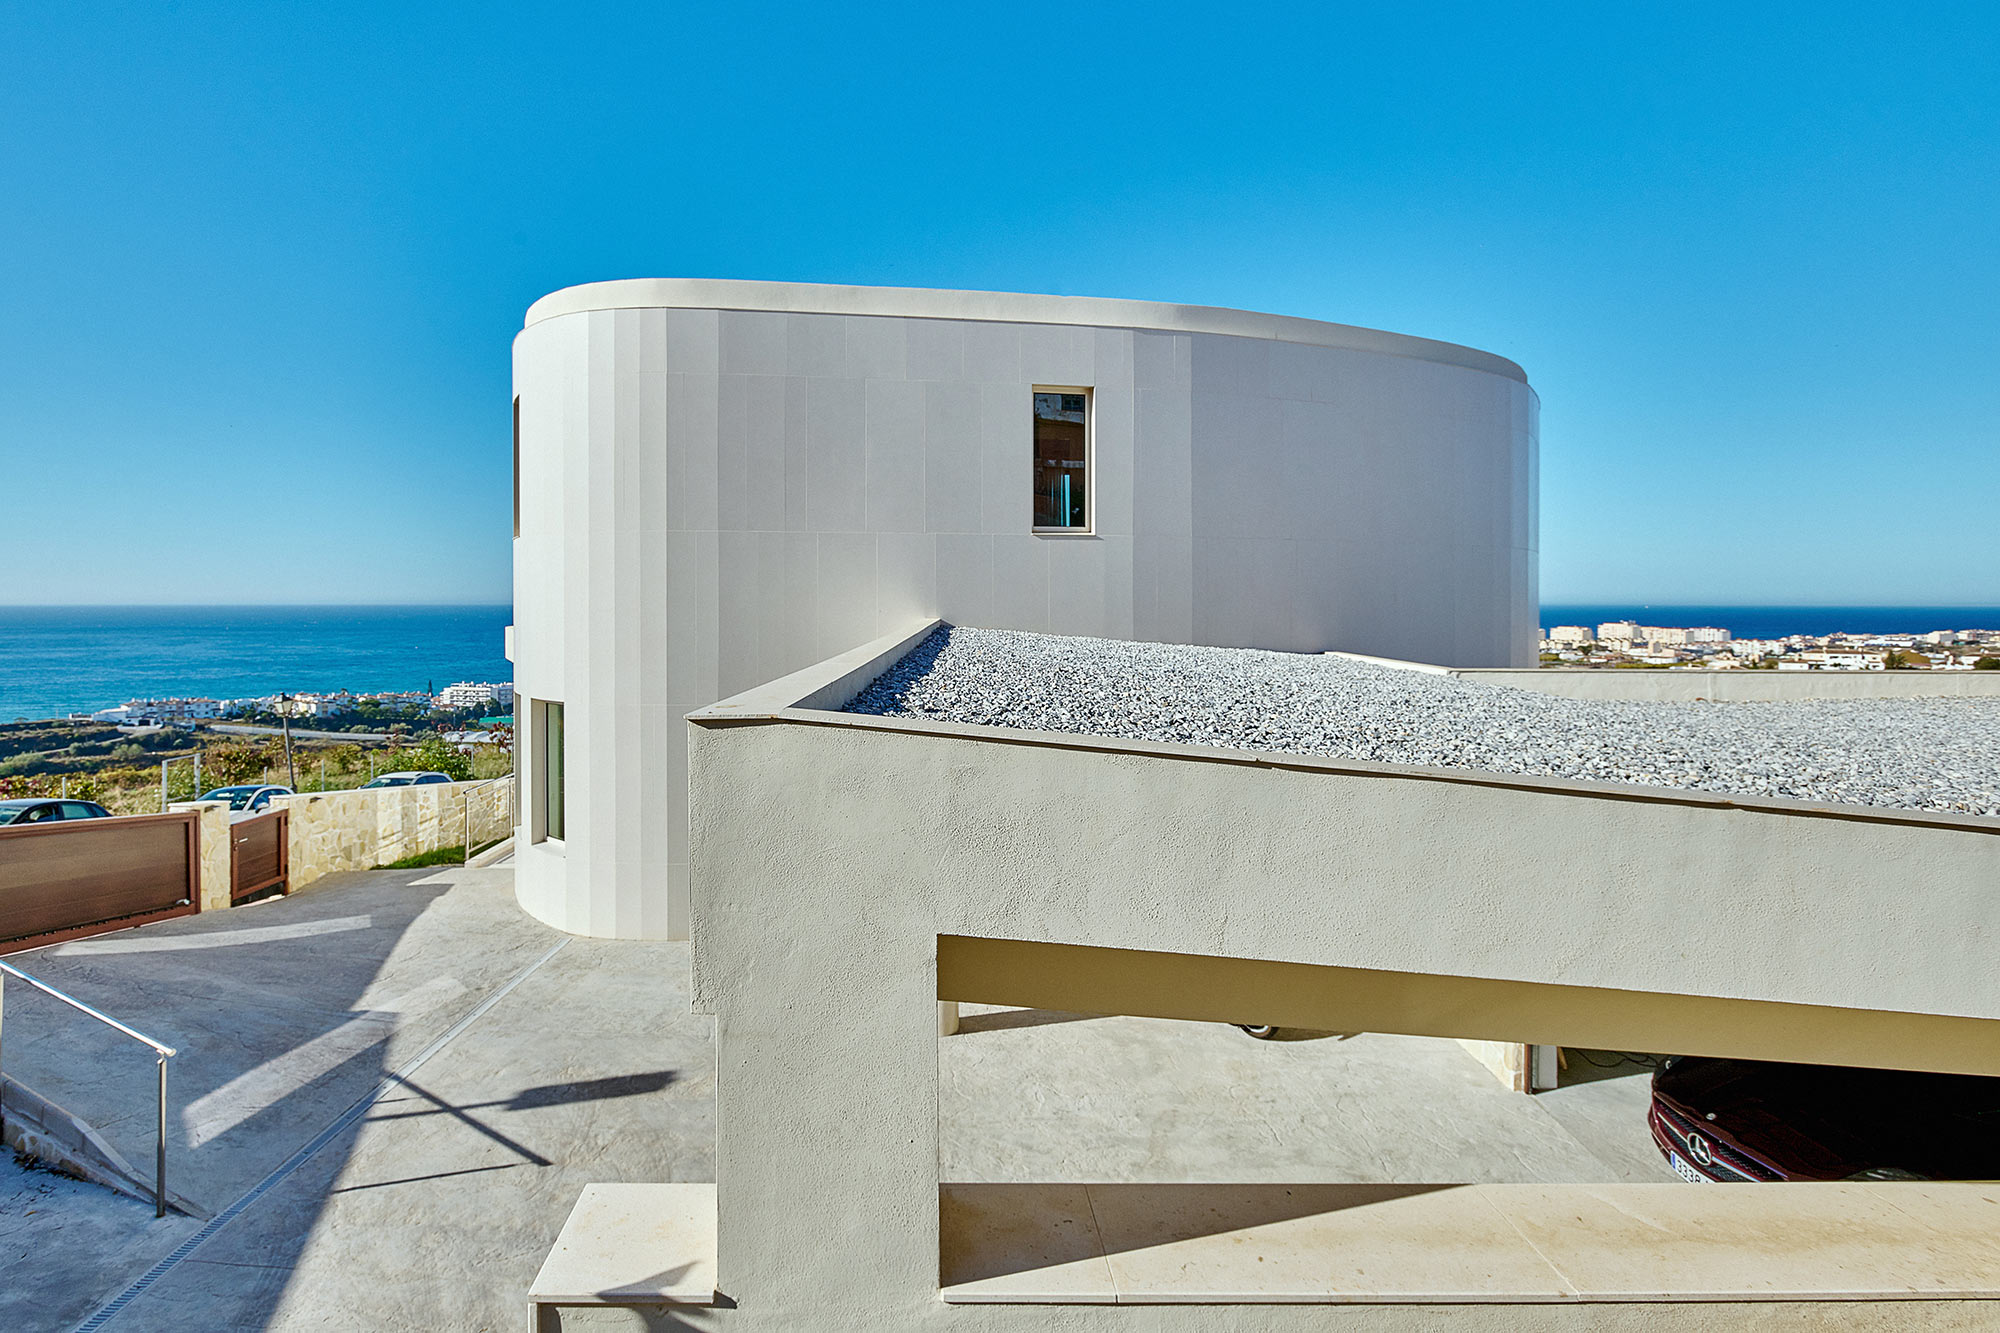 Image of Casa Tony Malaga 42 in A house that redefines and modernises the traditional Granada architecture  - Cosentino